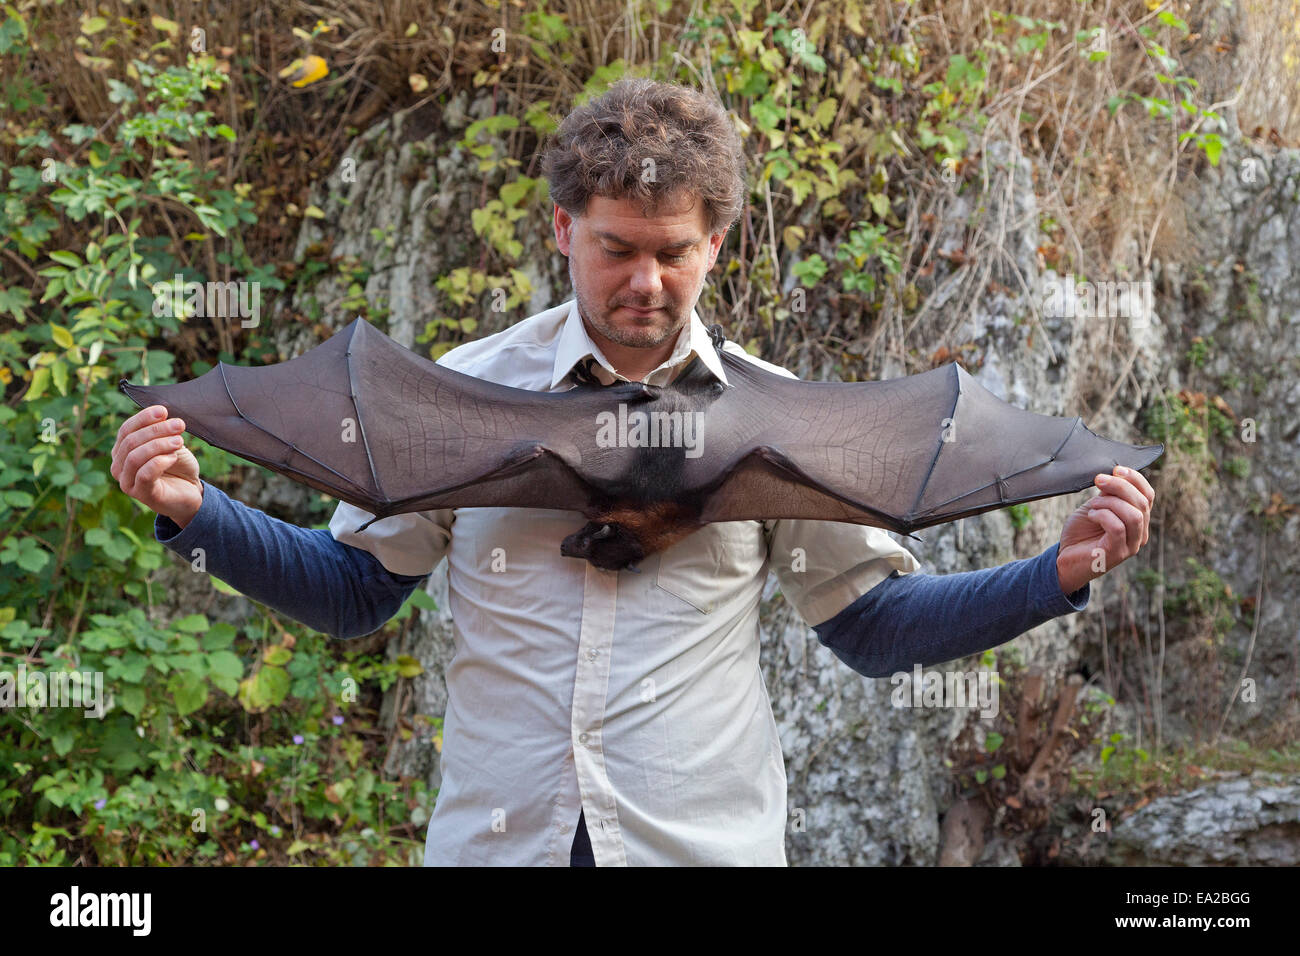 man showing the wing-span of a flying fox at the bat centre 'Noctalis', Bad Segeberg, Schleswig-Holstein, Germany Stock Photo